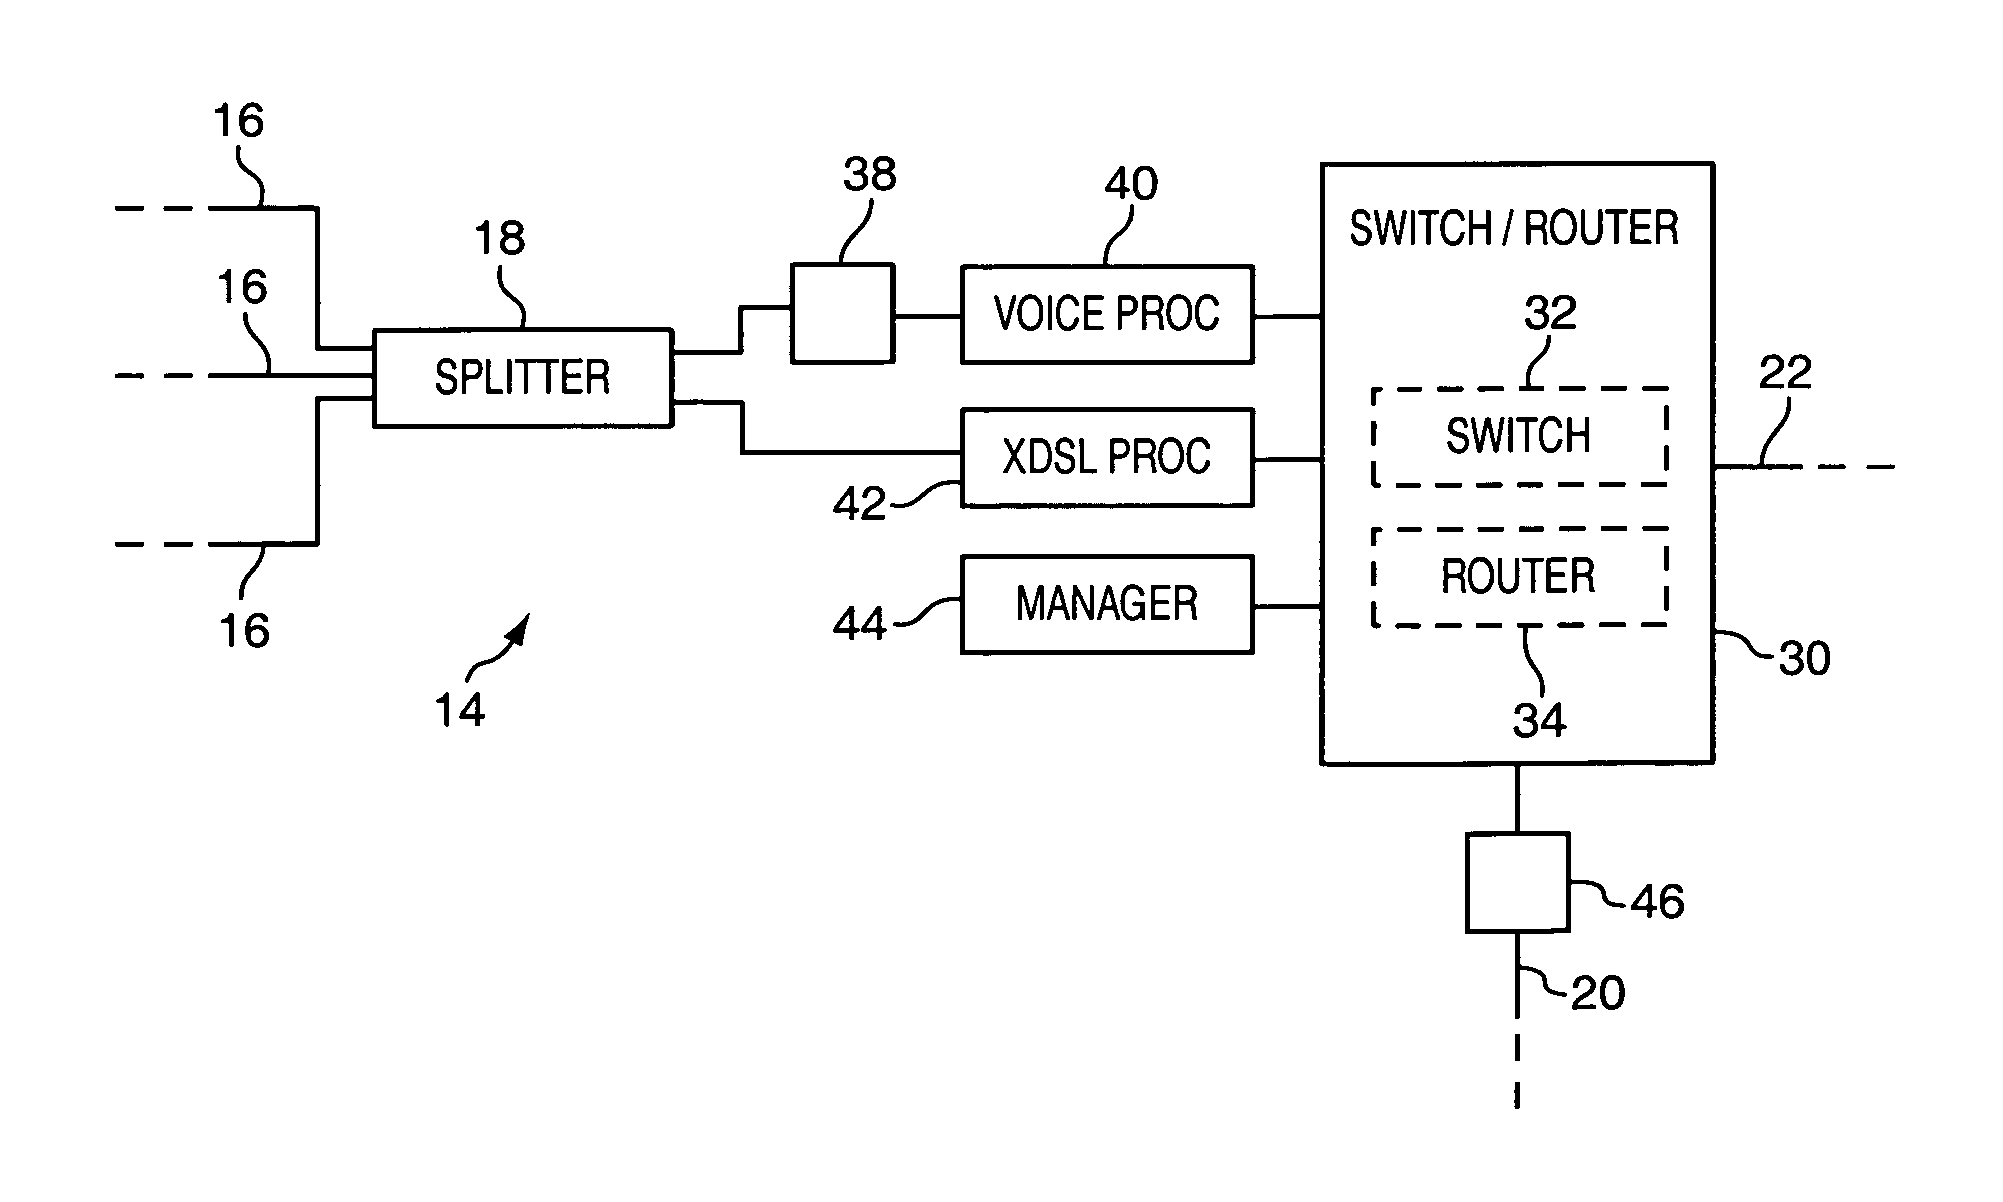 System and method for prioritizing and communicating subscriber voice and data information